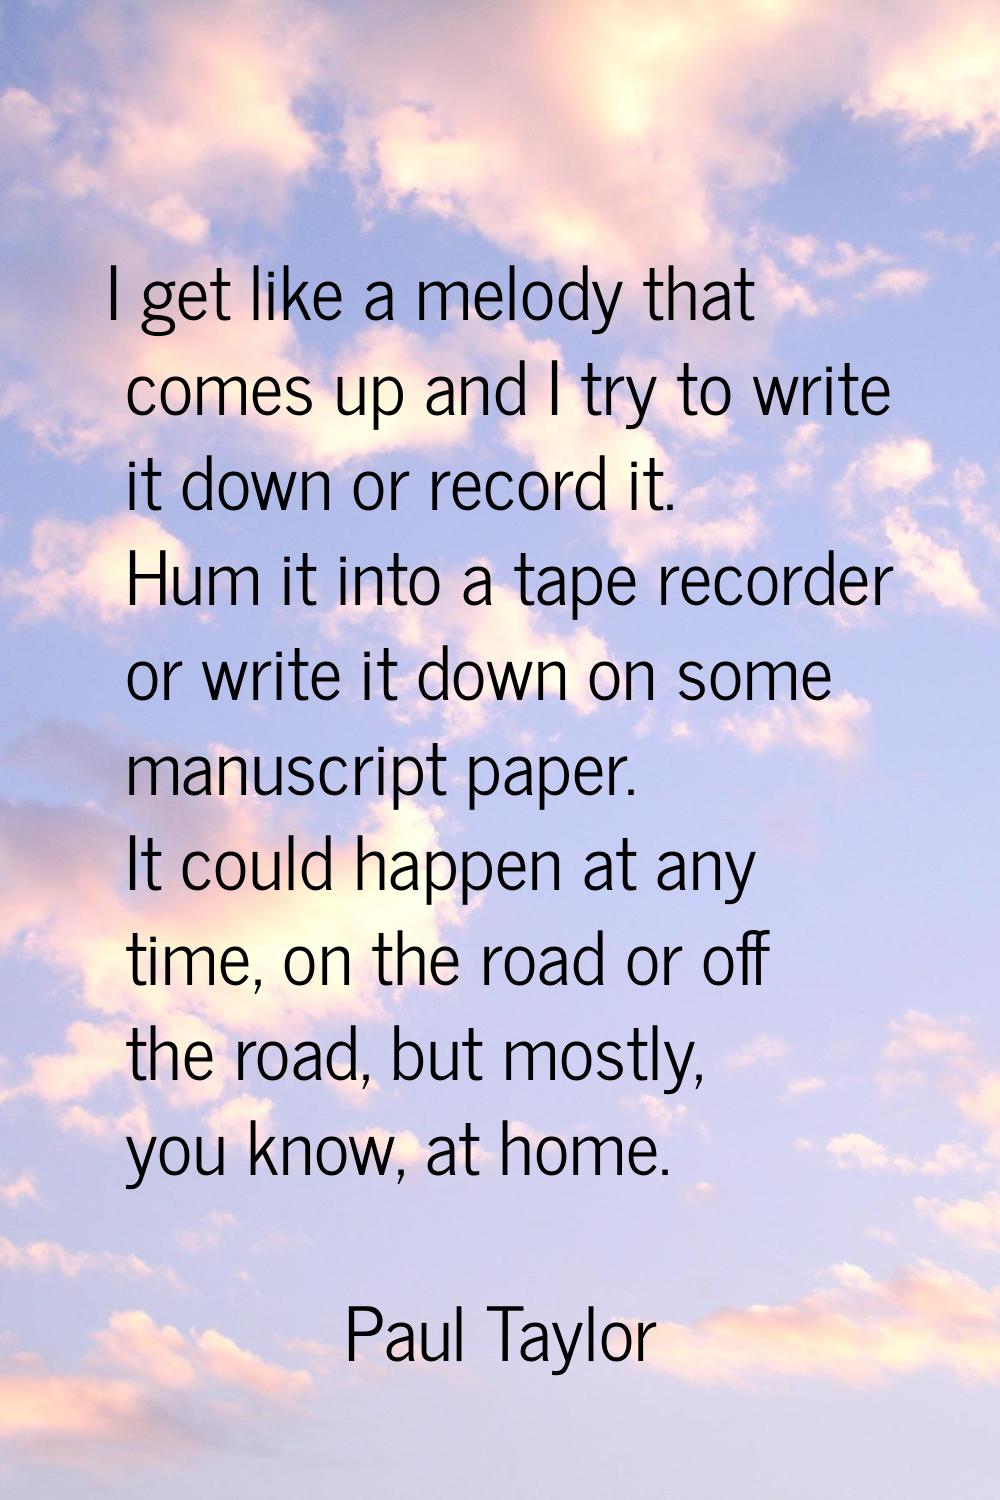 I get like a melody that comes up and I try to write it down or record it. Hum it into a tape recor